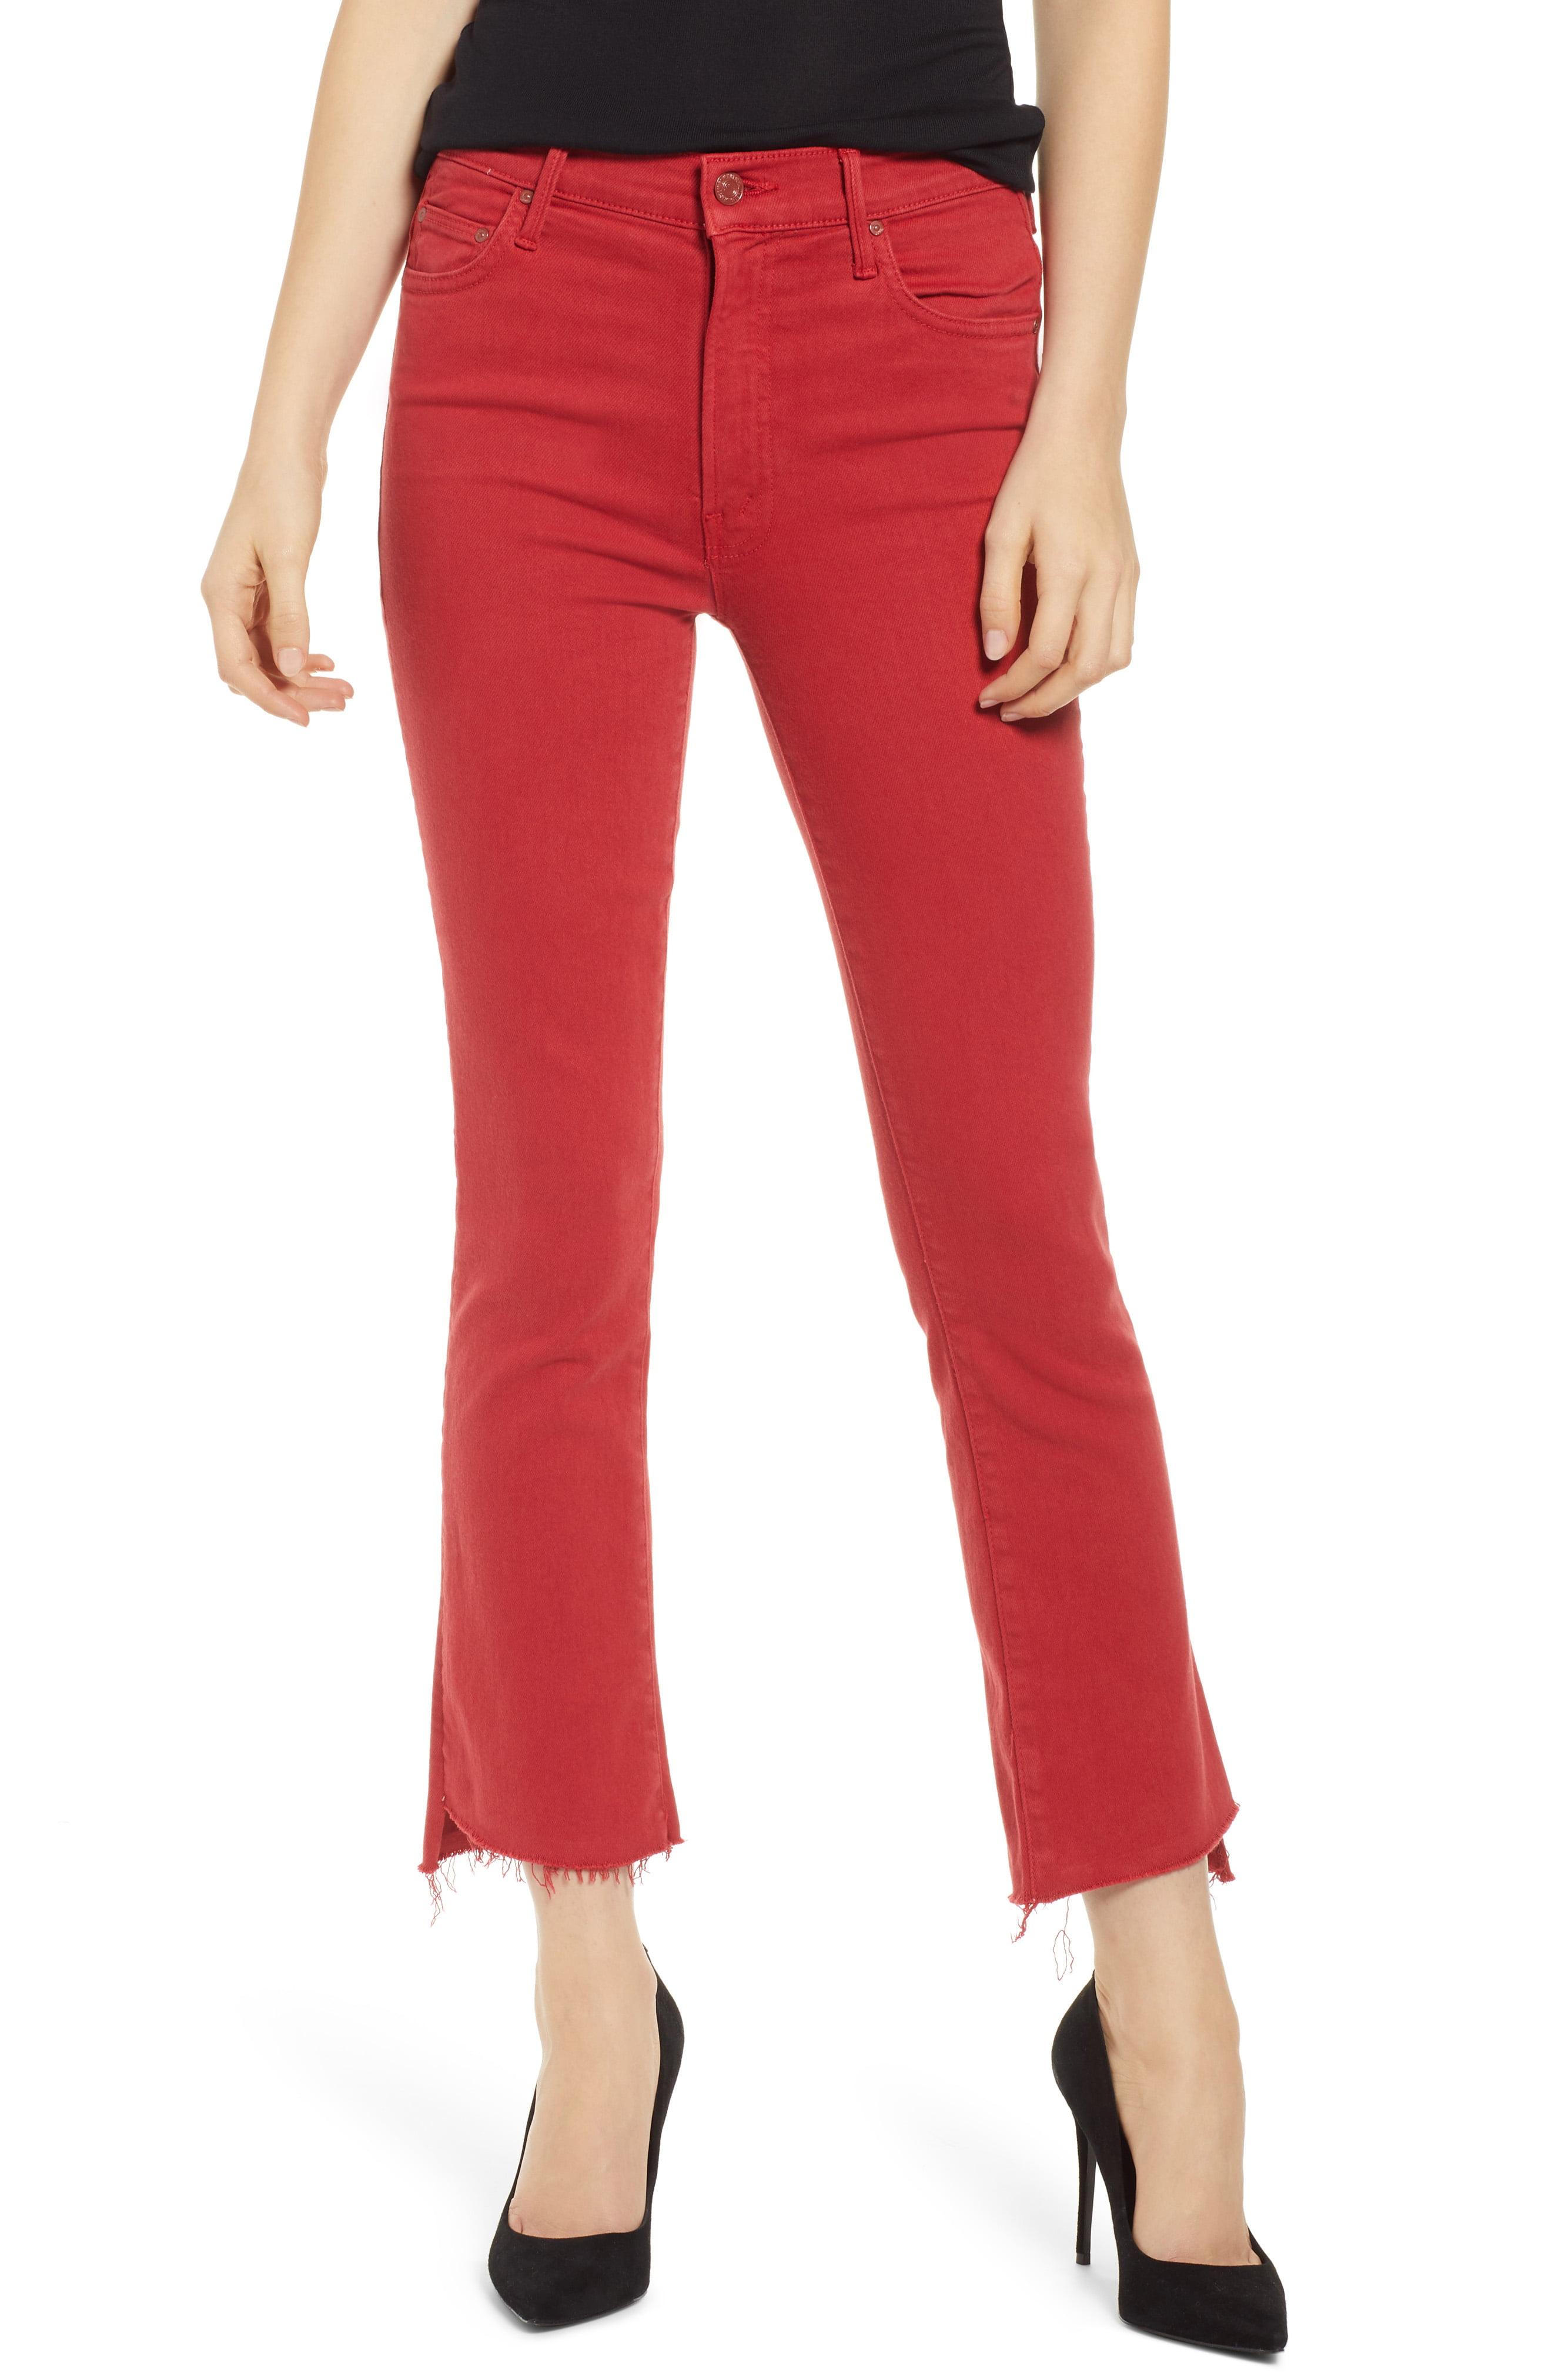 Lyst - Mother The Insider Step Hem Crop Jeans in Red